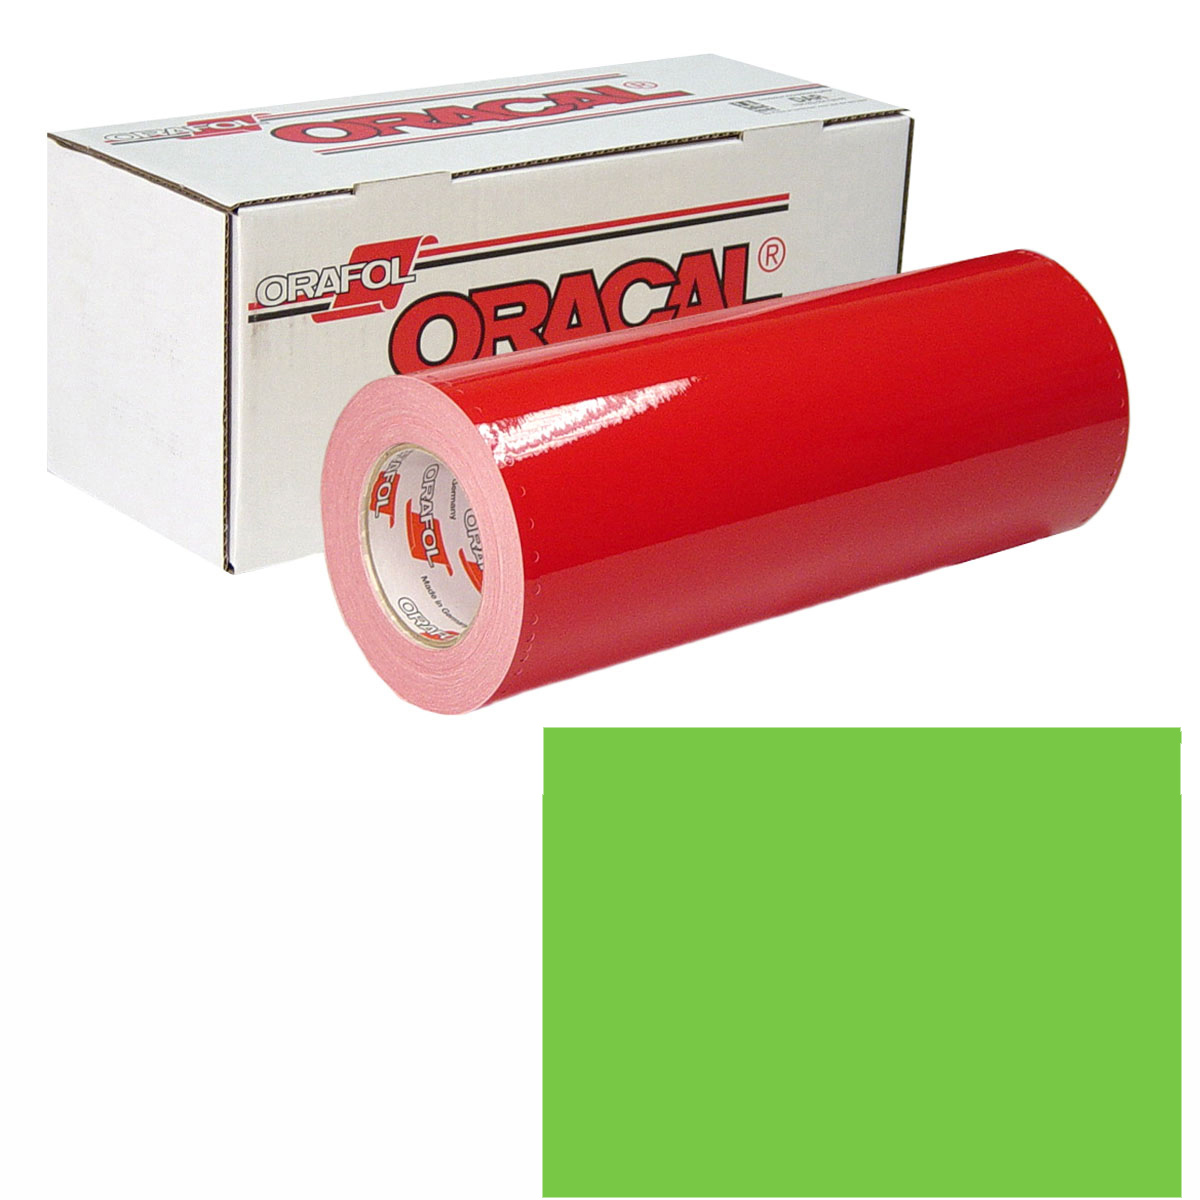 ORACAL 951 15in X 50yd 601 Lime Green